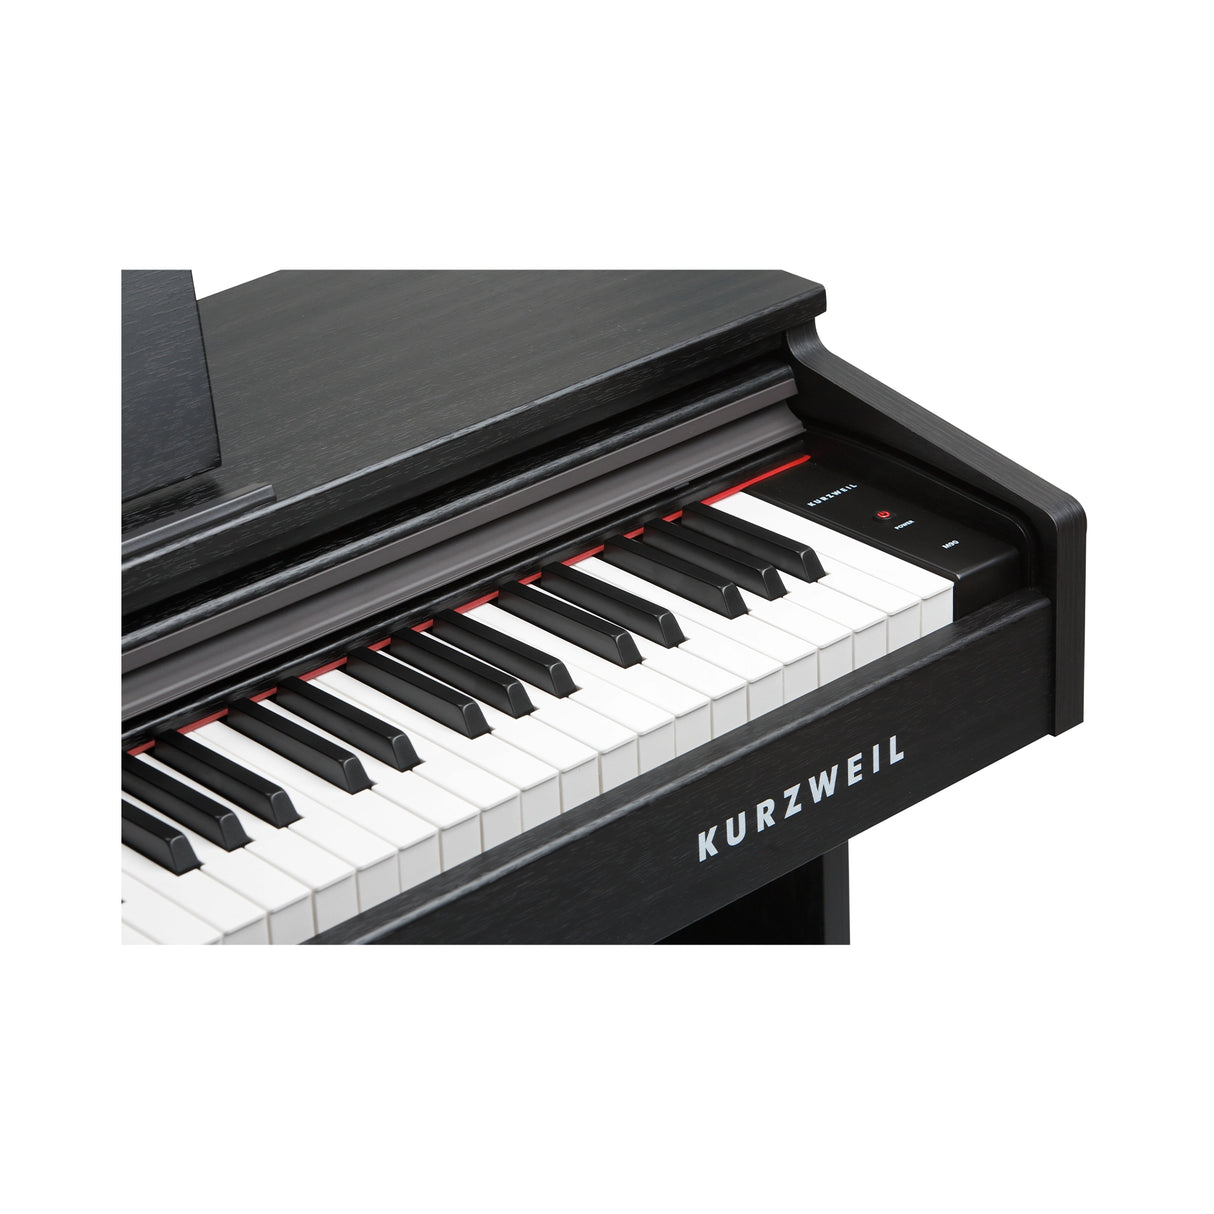 Kurzweil M90-SR 88-Key Fully-Weighted Hammer Action Digital Piano, Rosewood